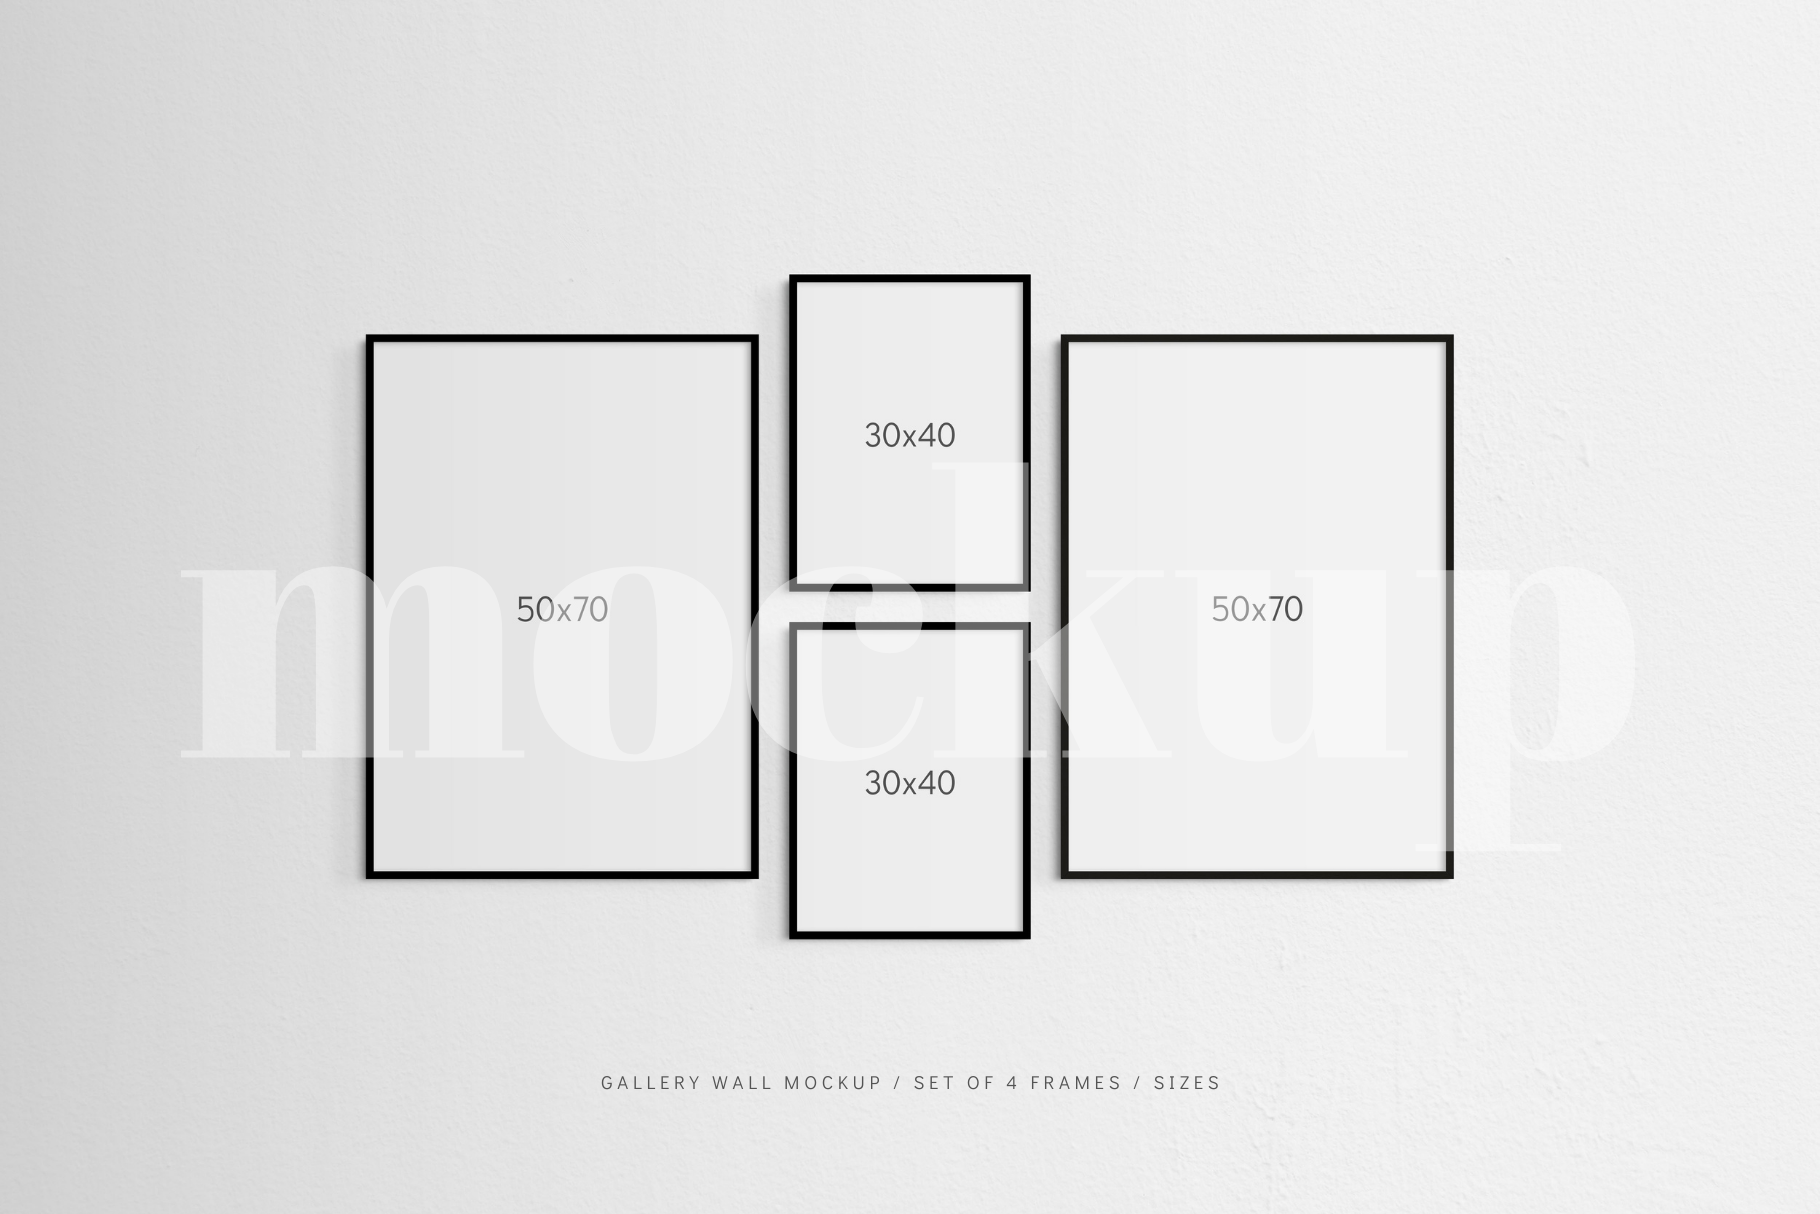 A modern, minimalist gallery wall frame mockup that features a set of 4 vertical black frames.